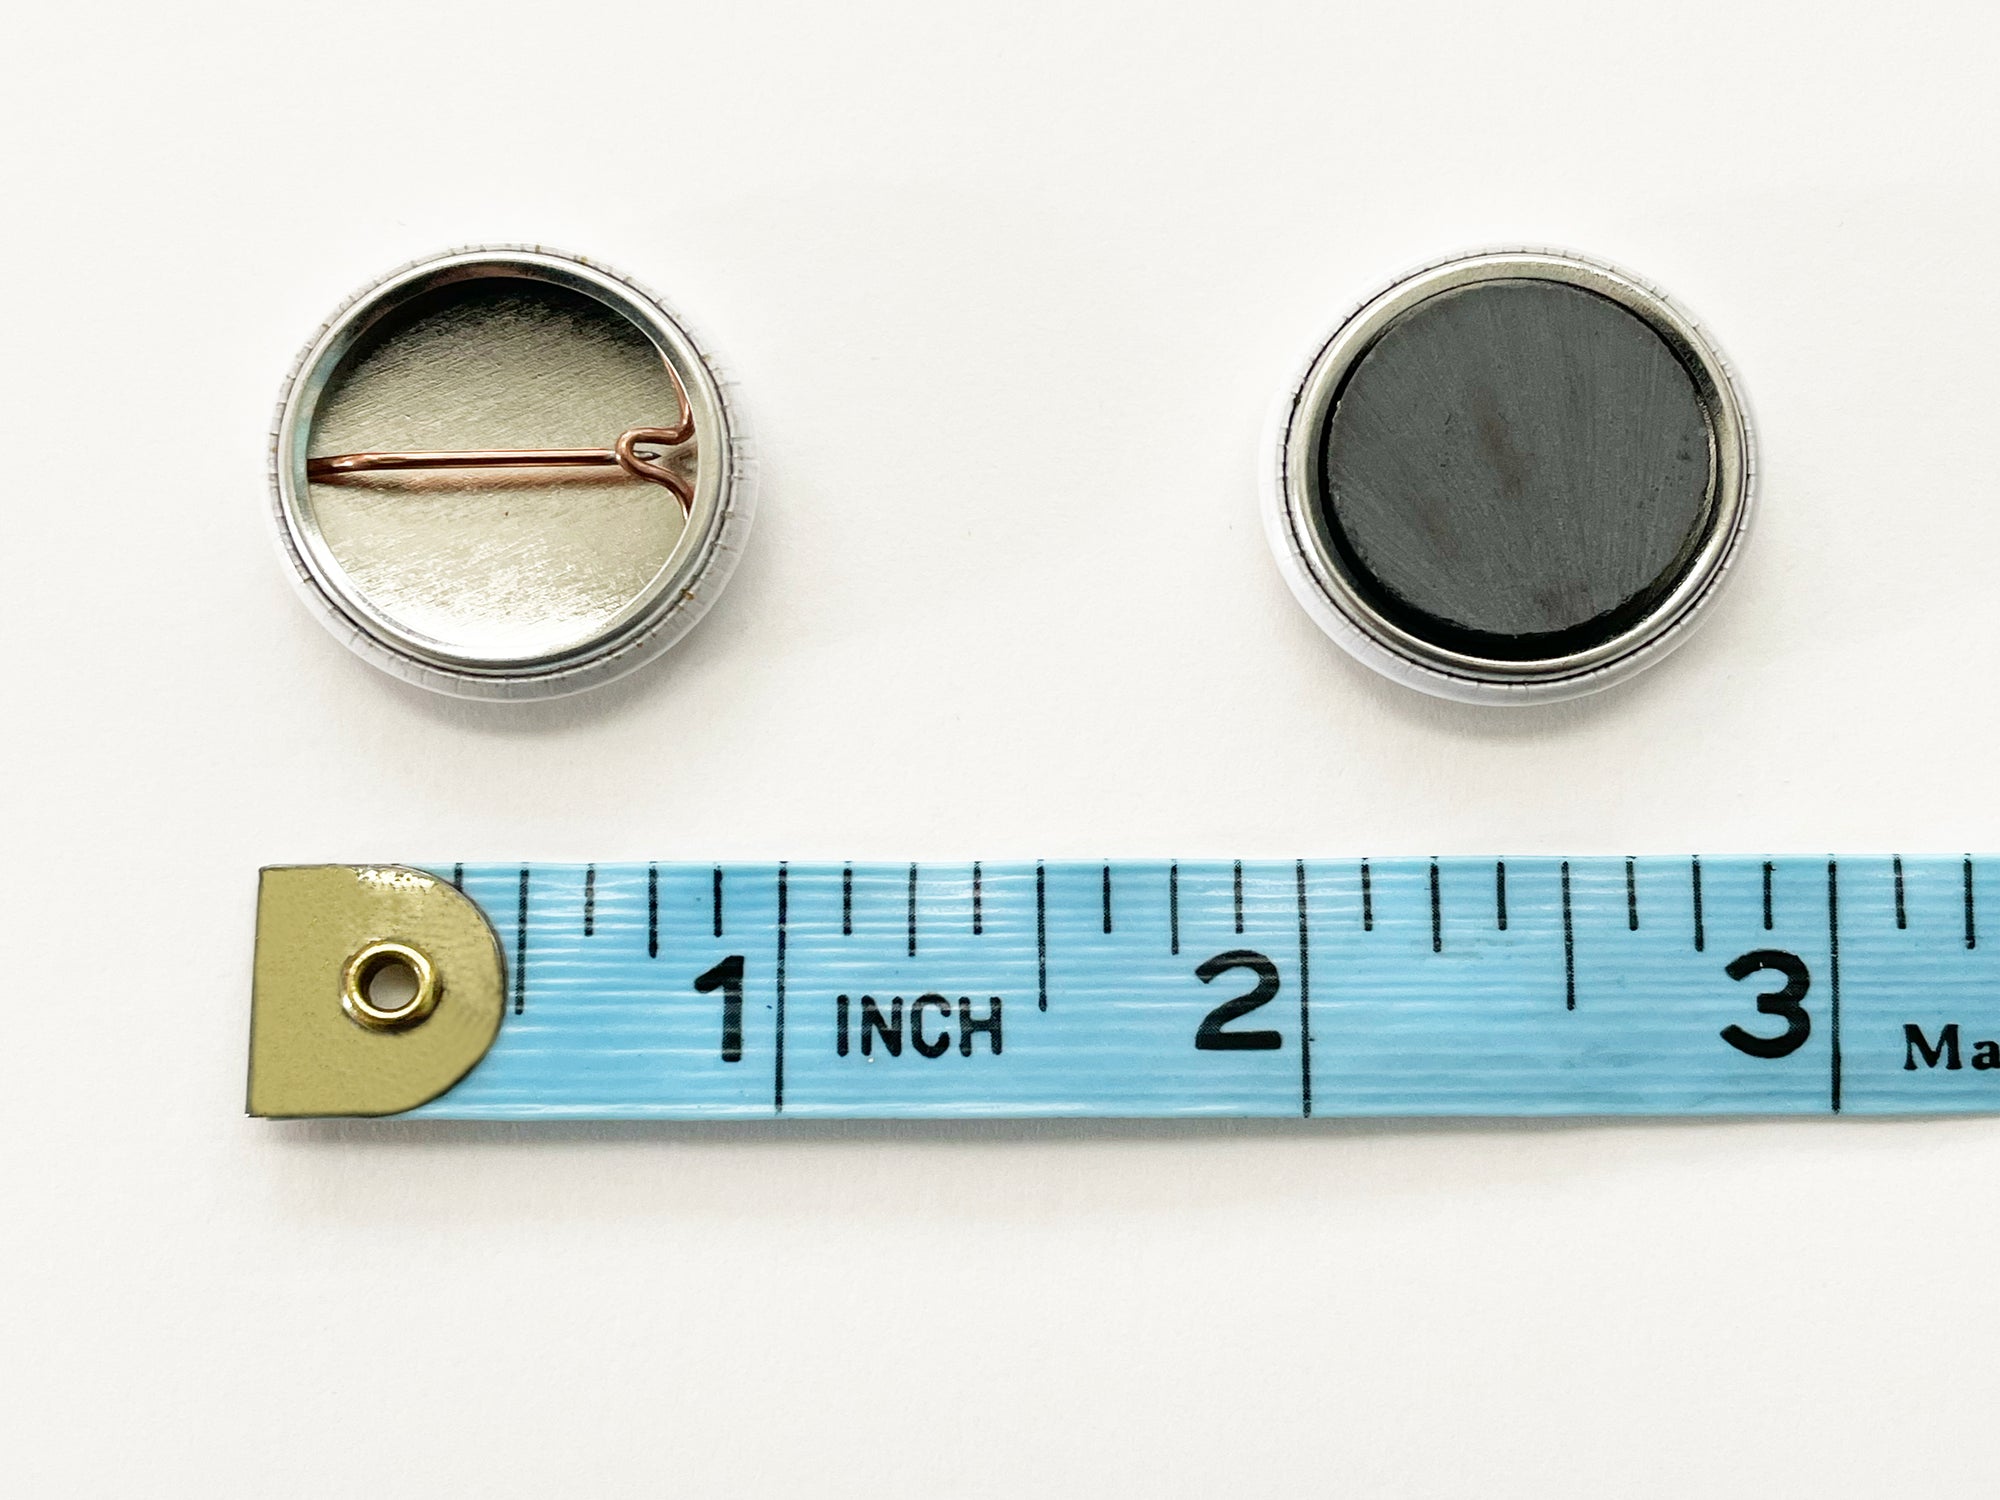 Backs of 1" pin back button and 1" magnet, shown with measuring tape for scale